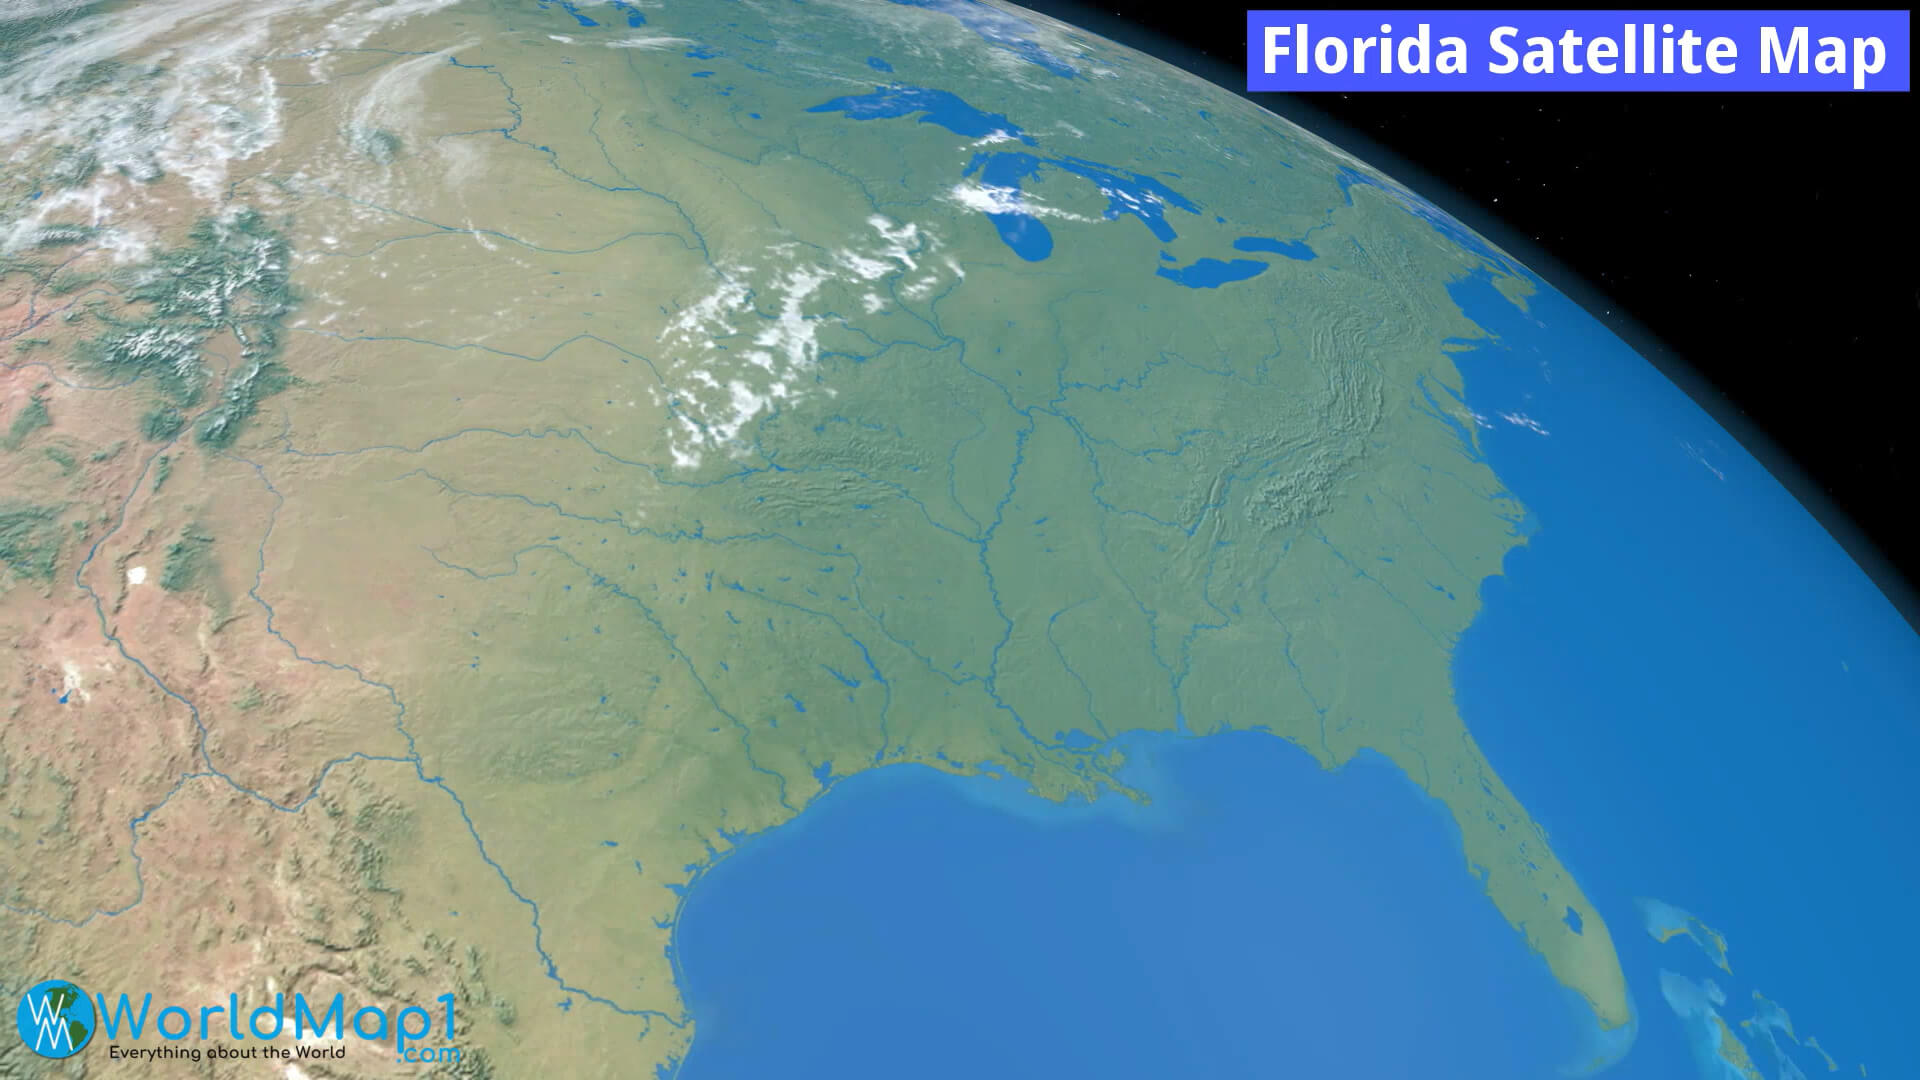 Florida Satellite View from Space